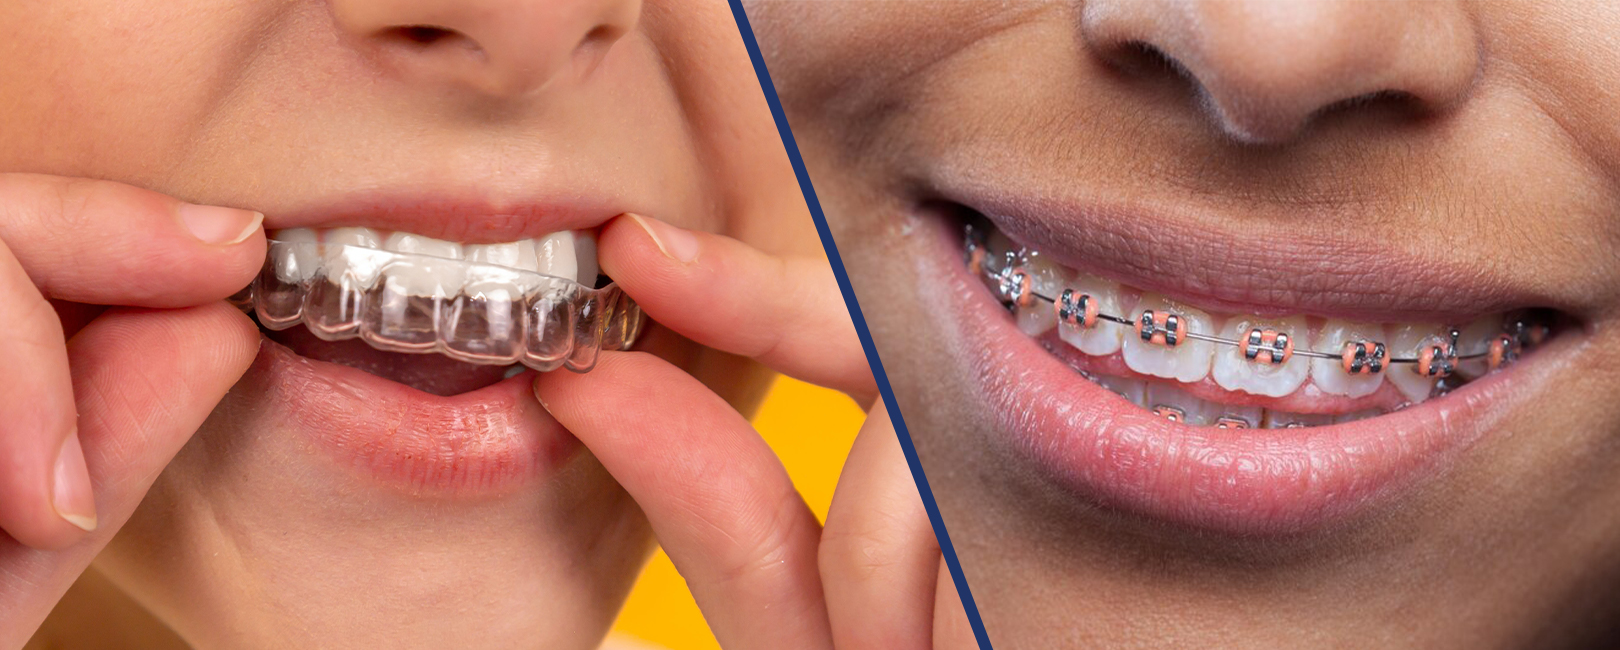 Two pictures of a woman with braces on her teeth, showcasing the difference between clear aligners and traditional braces.